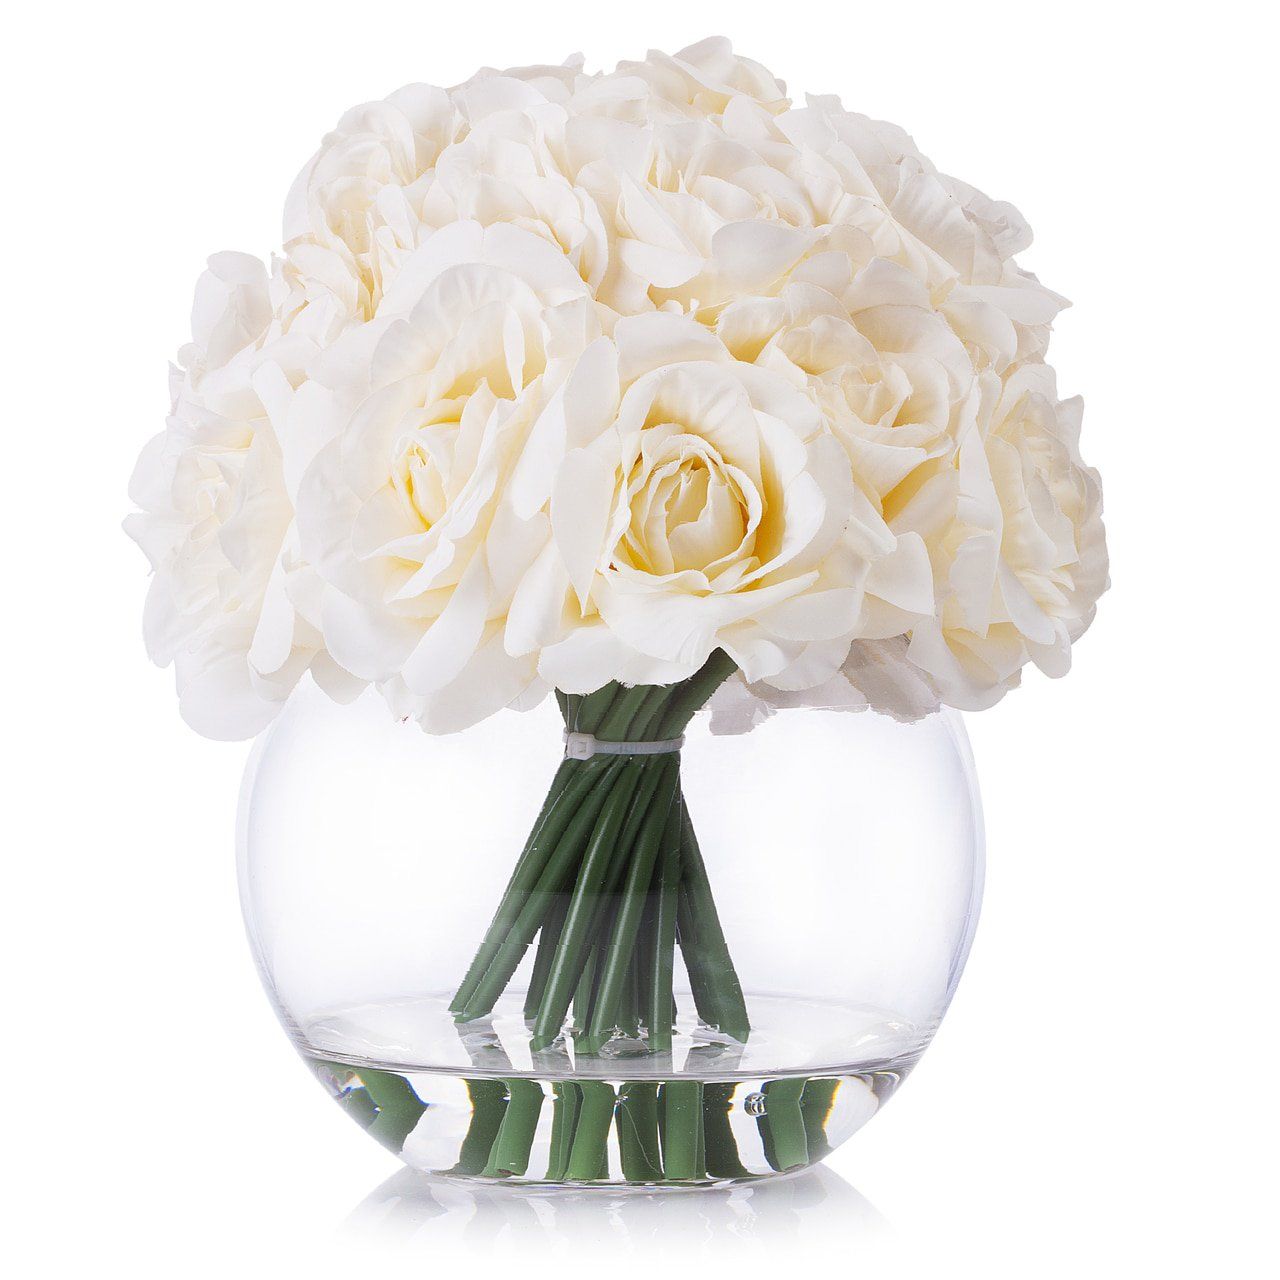 Enova Home 21 Heads Rose Silk Flower Arrangement in Round Clear Glass Vase With Faux Water | Walmart (US)